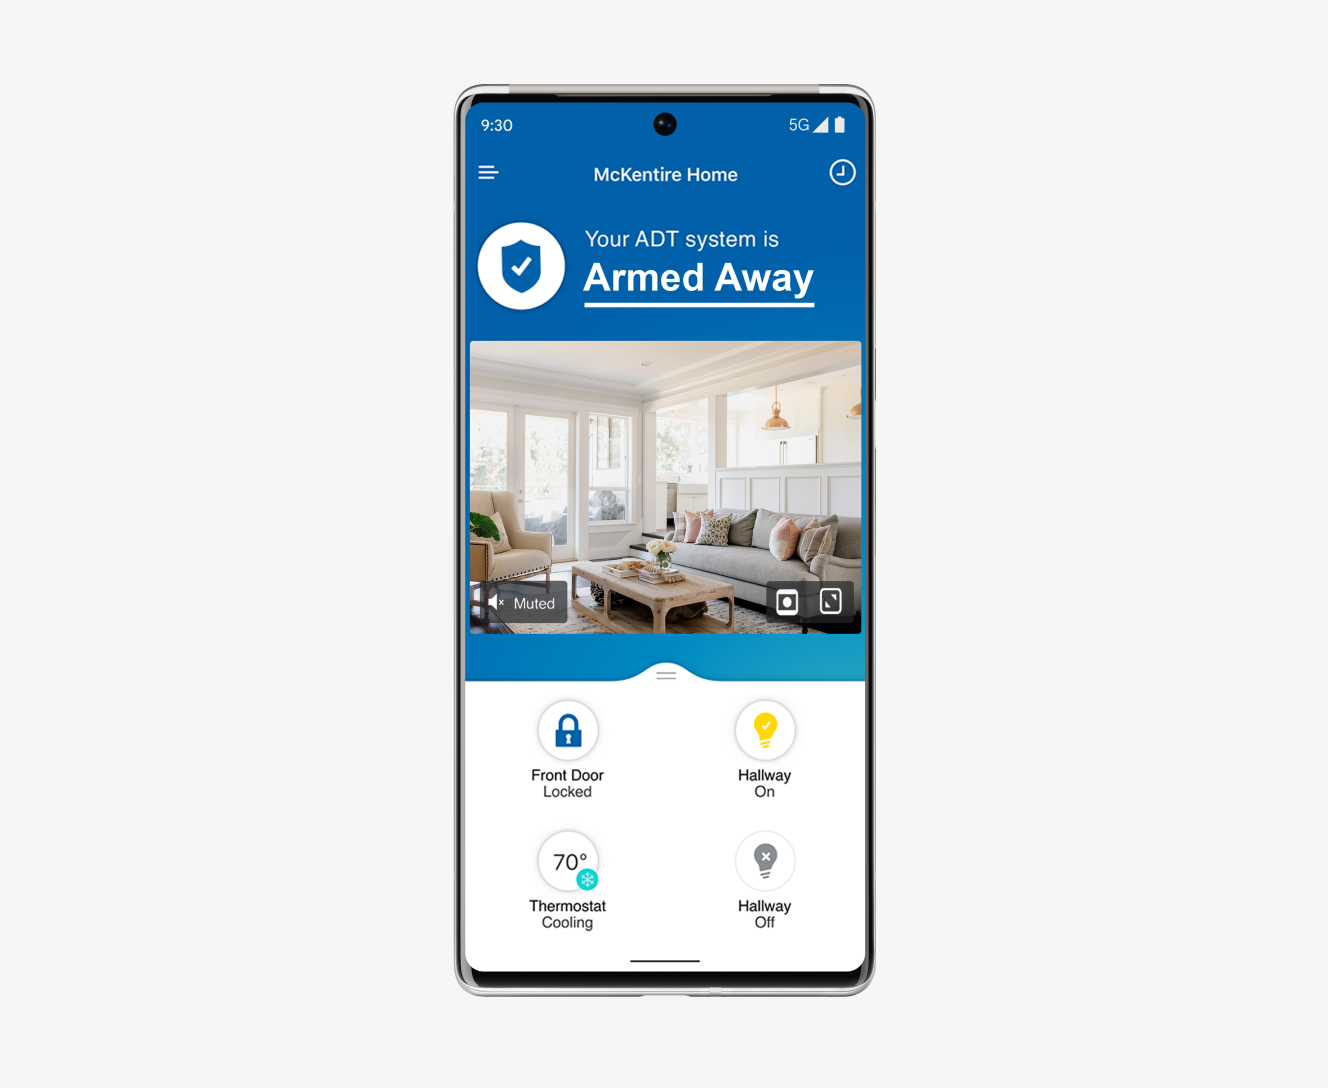 The ADT mobile app